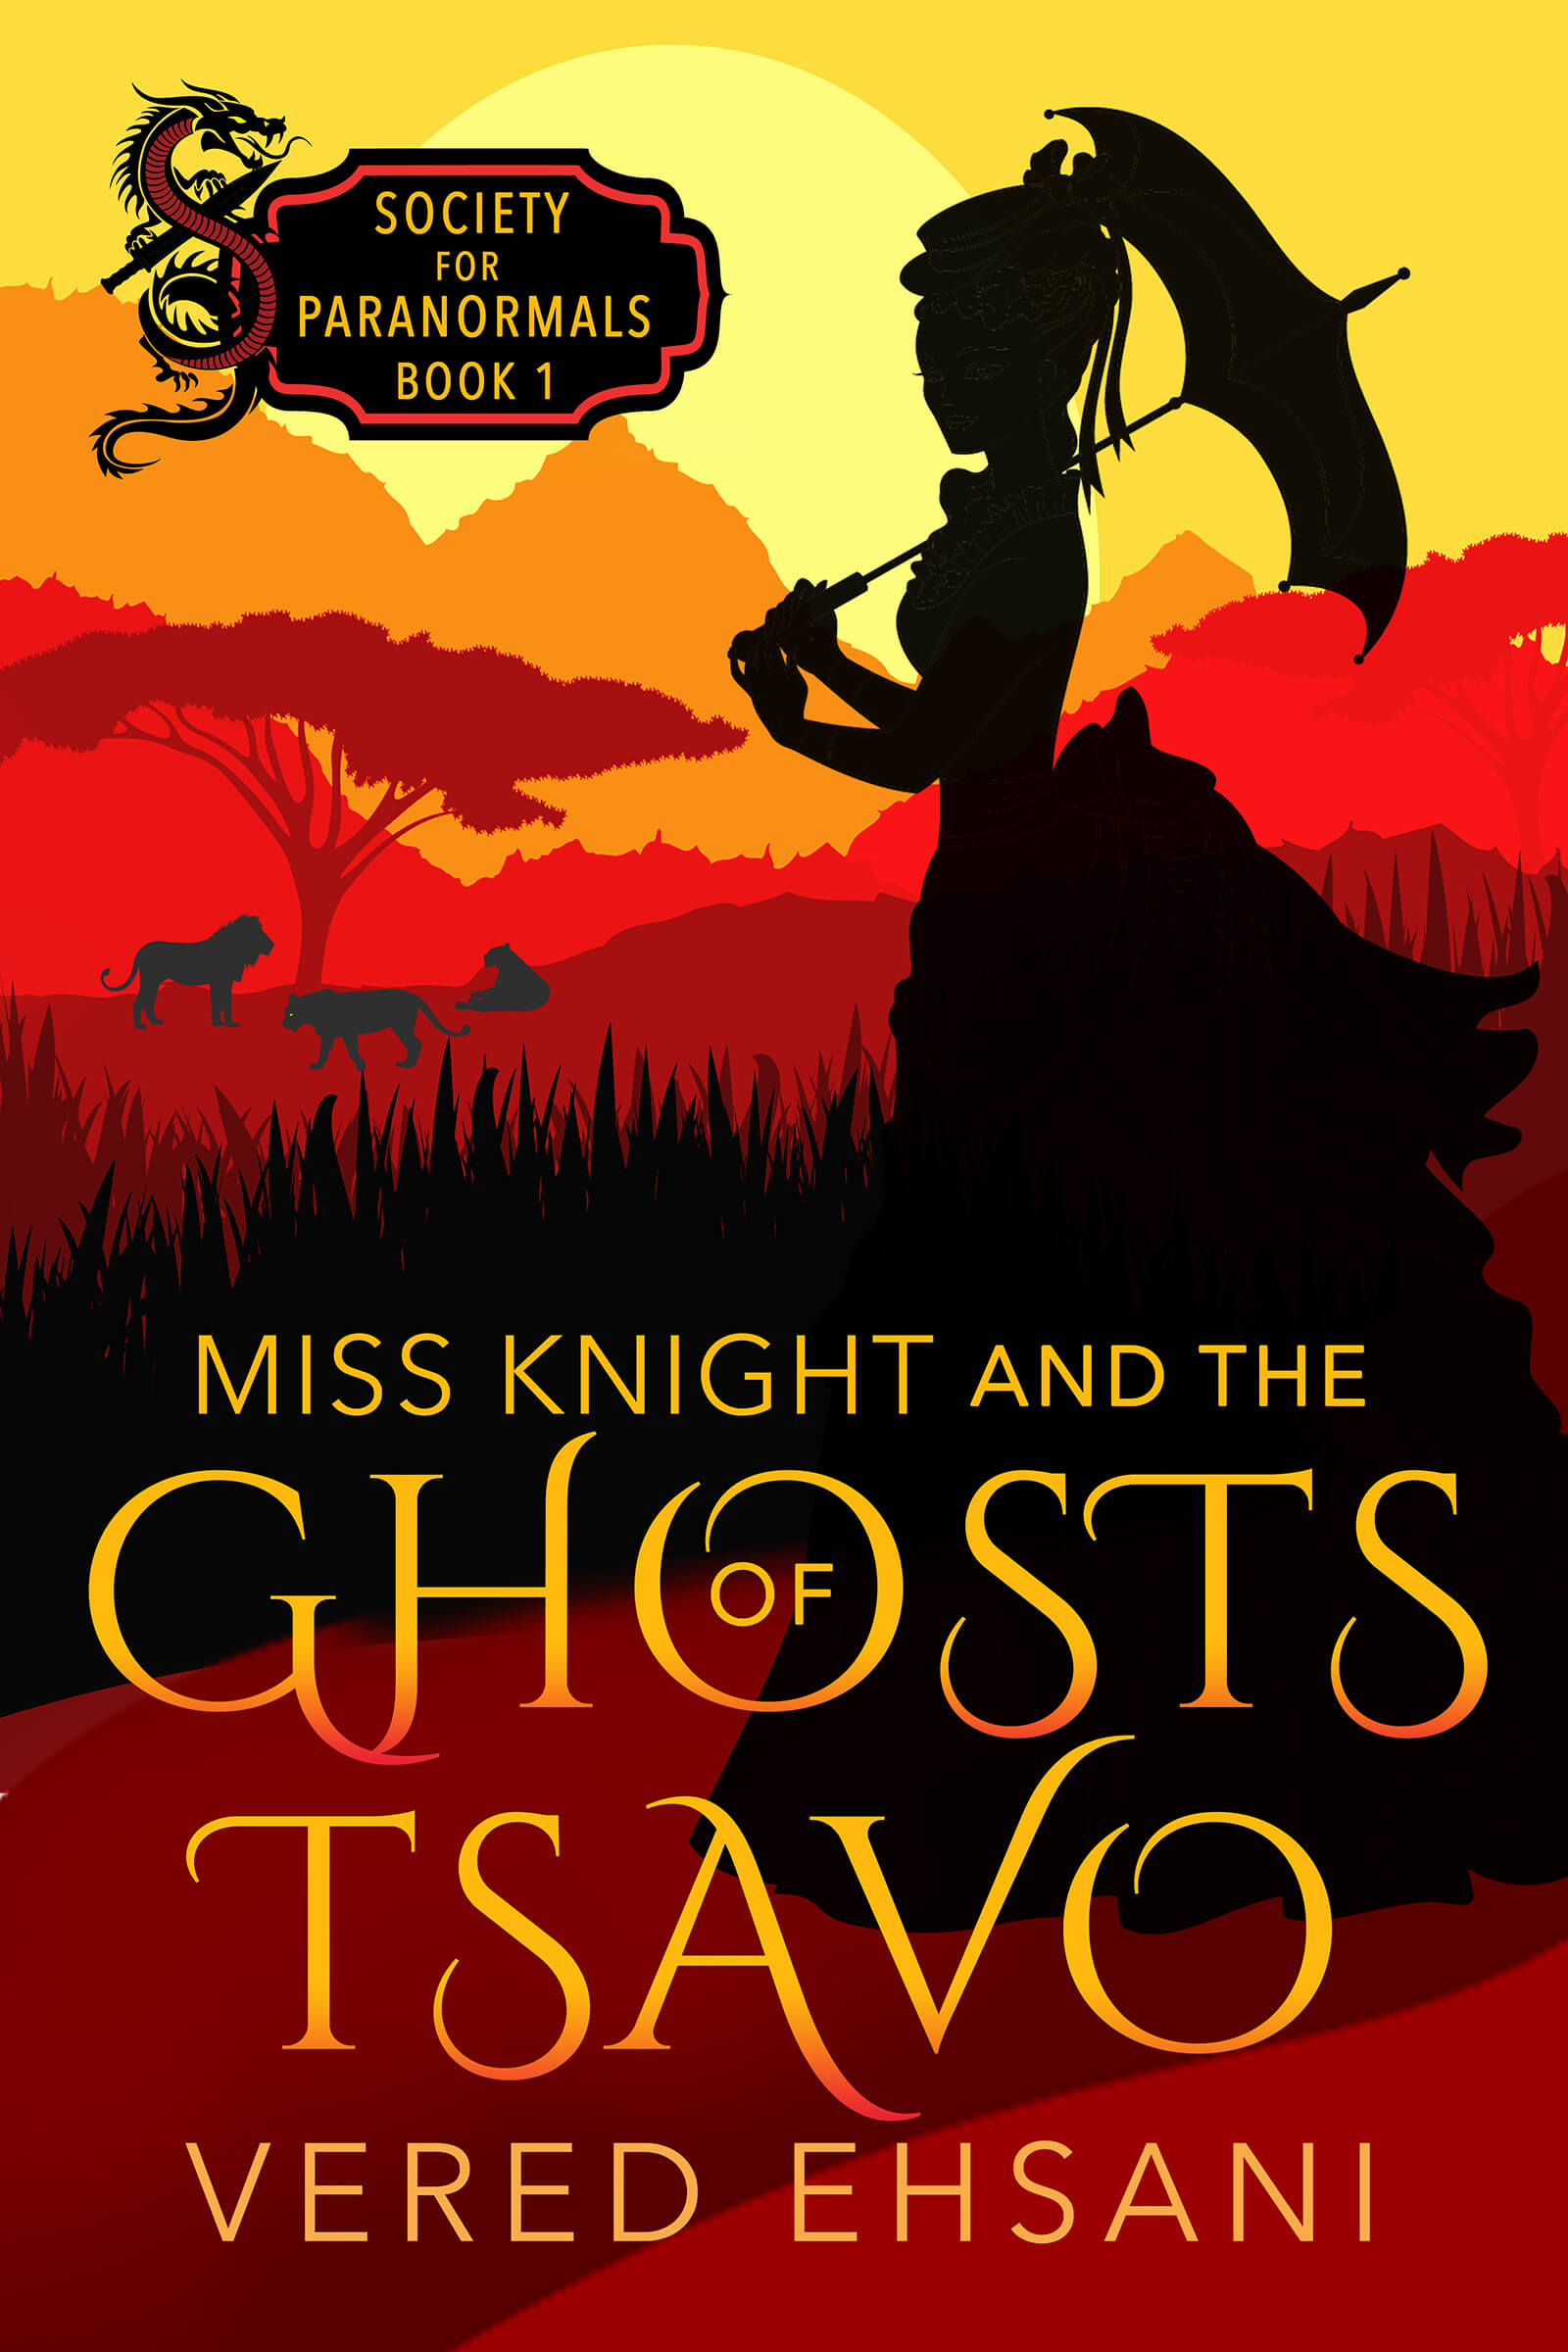 FREE: Miss Knight and the Ghosts of Tsavo by Vered Ehsani